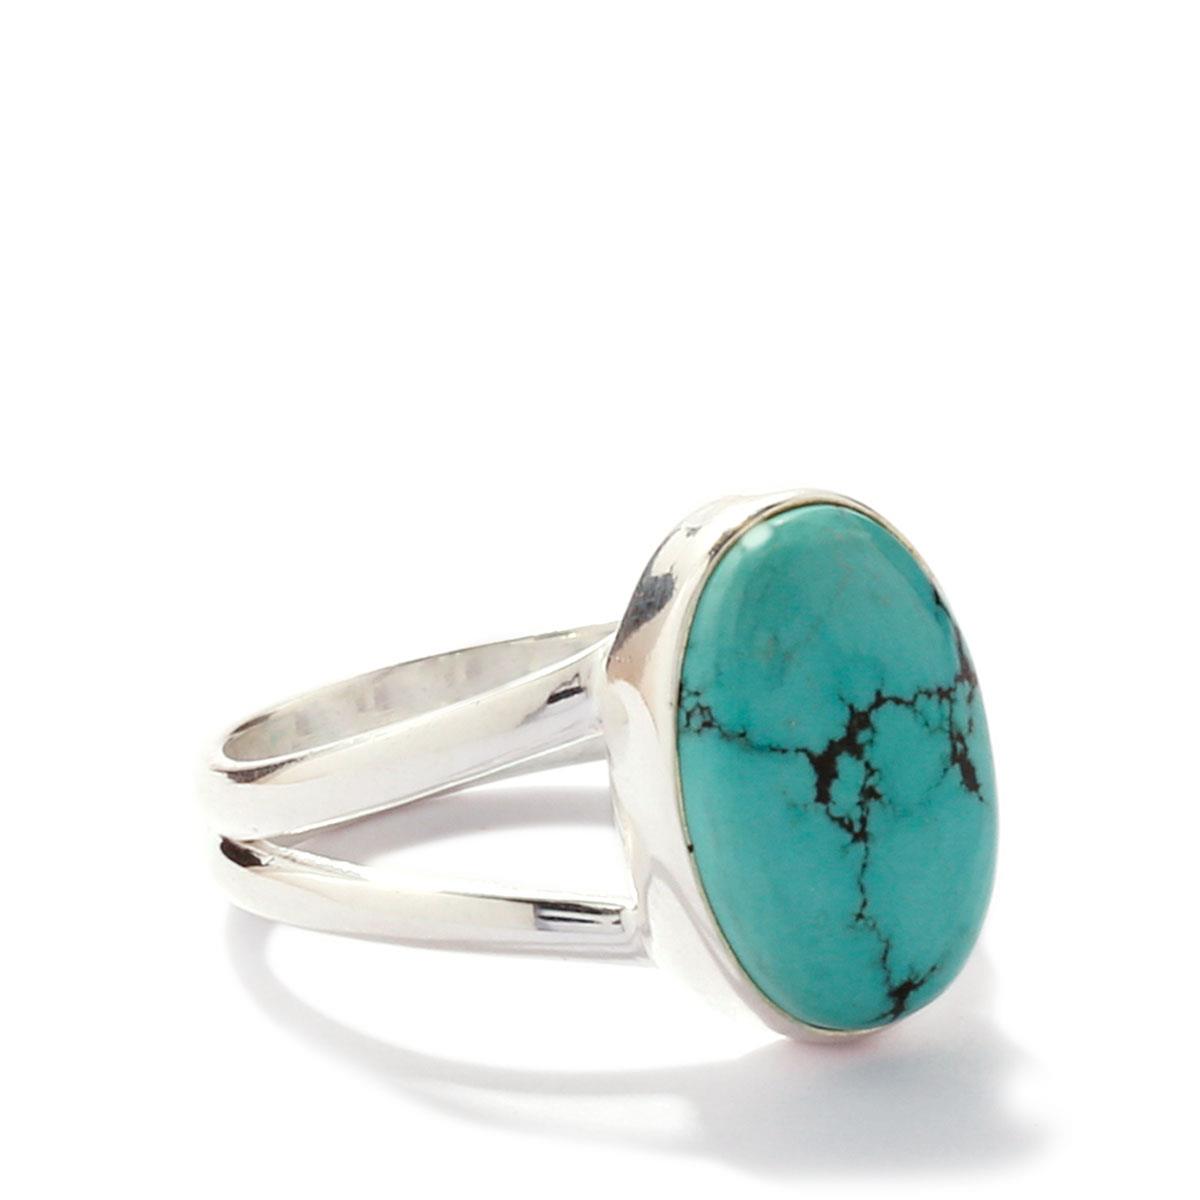 Tibetan Turquoise Sterling Silver Ring ATGW 5.46cts | Gemporia